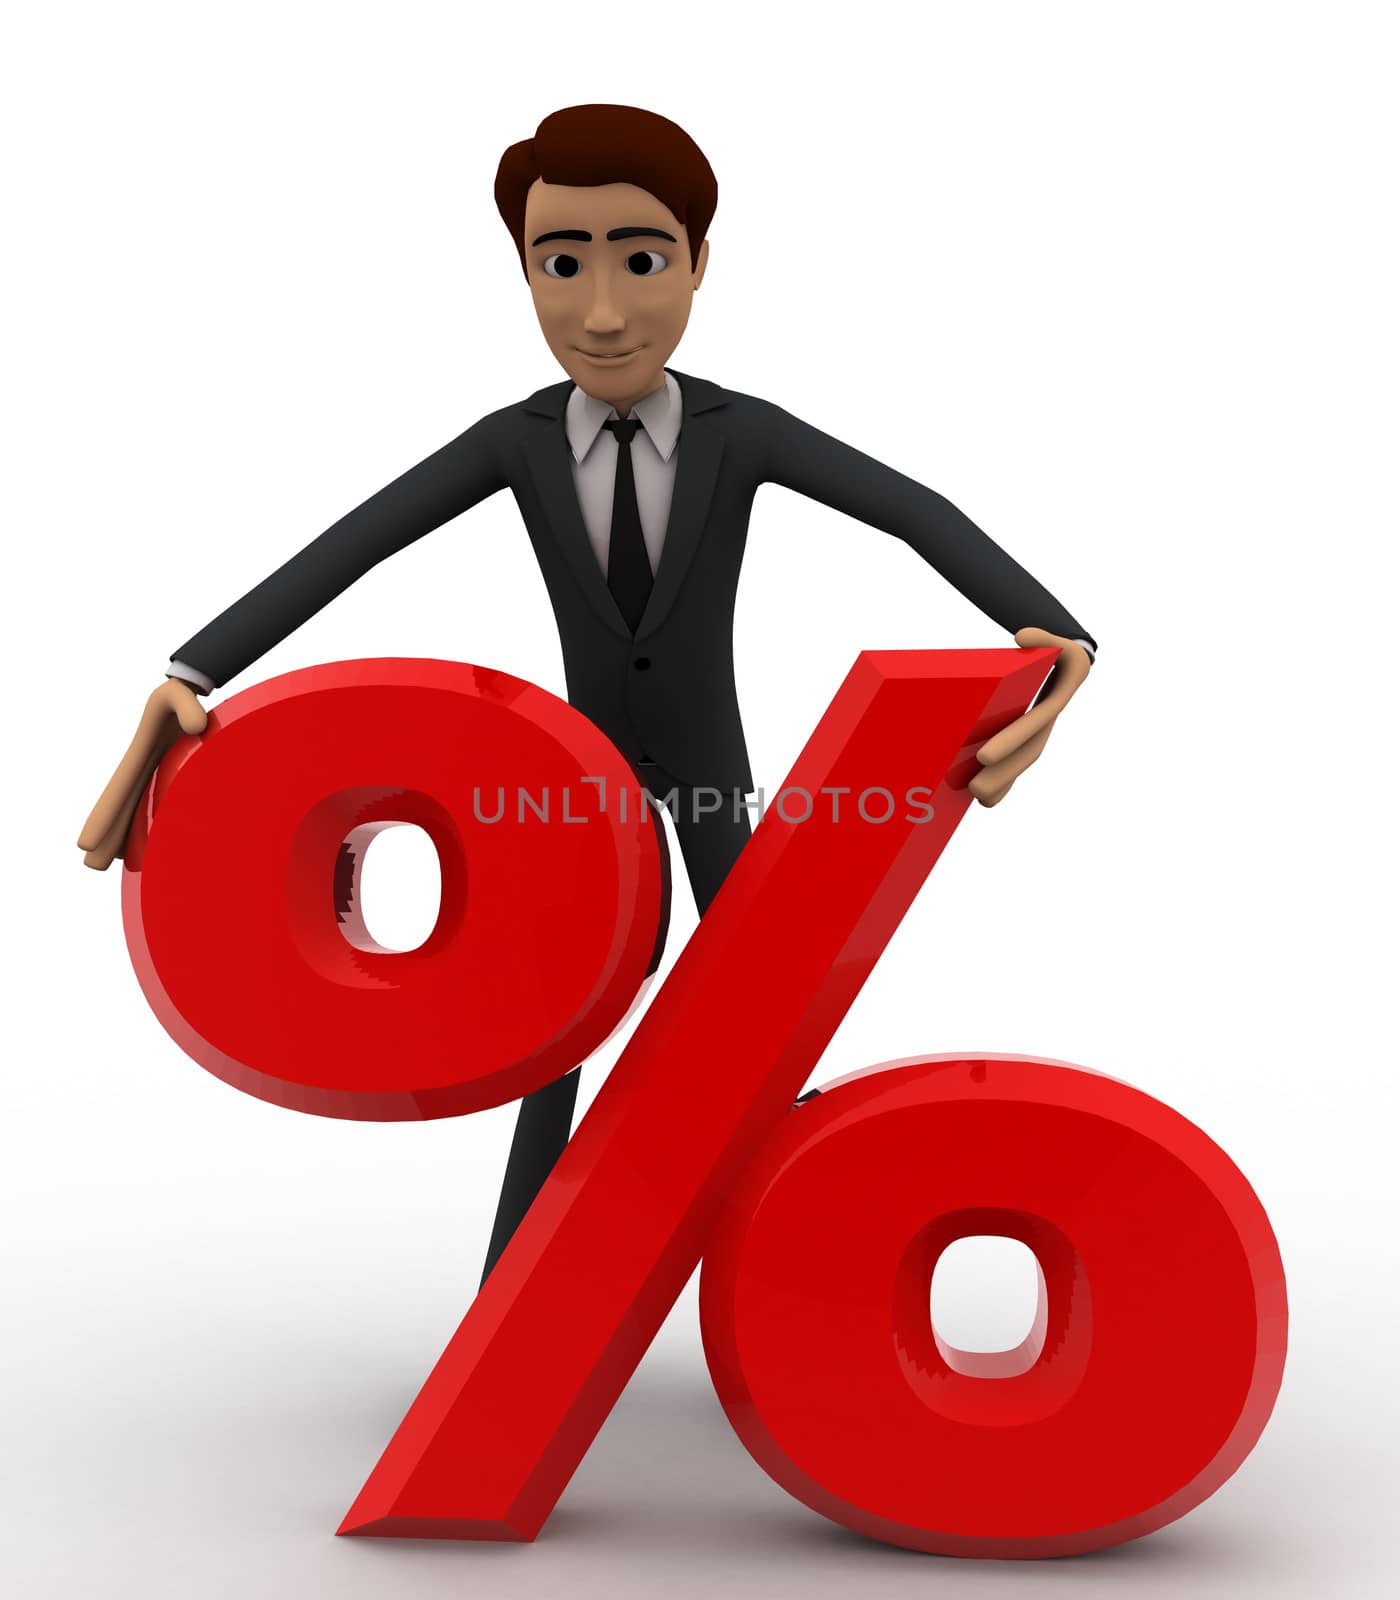 3d man holding red percent symbol in hand concept on white backgorund, front angle view